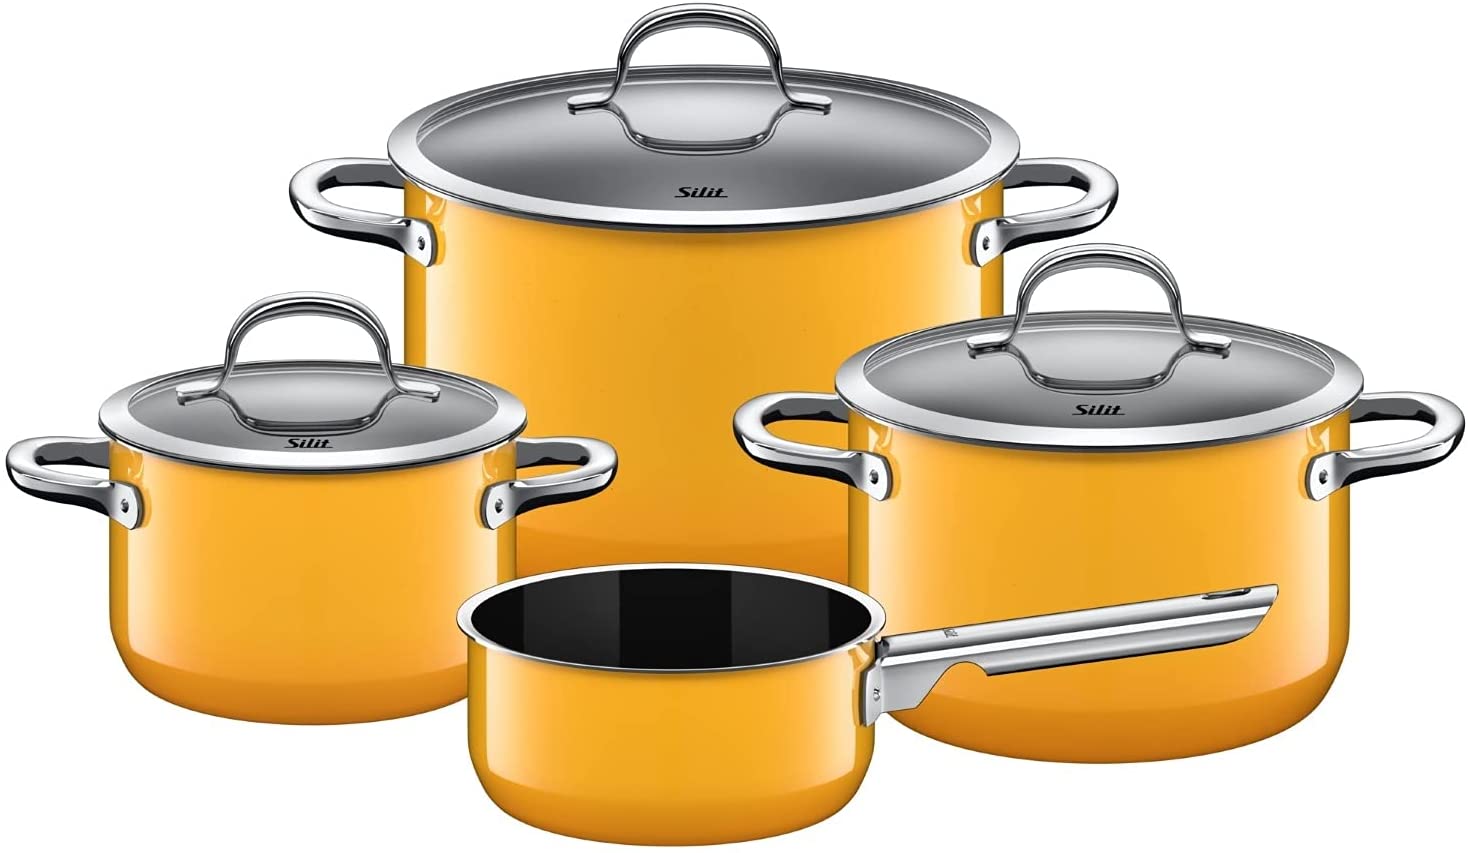 Silit Passion Yellow 4-Piece Induction Saucepan Set with Glass Lid, Silargan Functional Ceramic, Induction Pots Set, Nickel-Free, Yellow